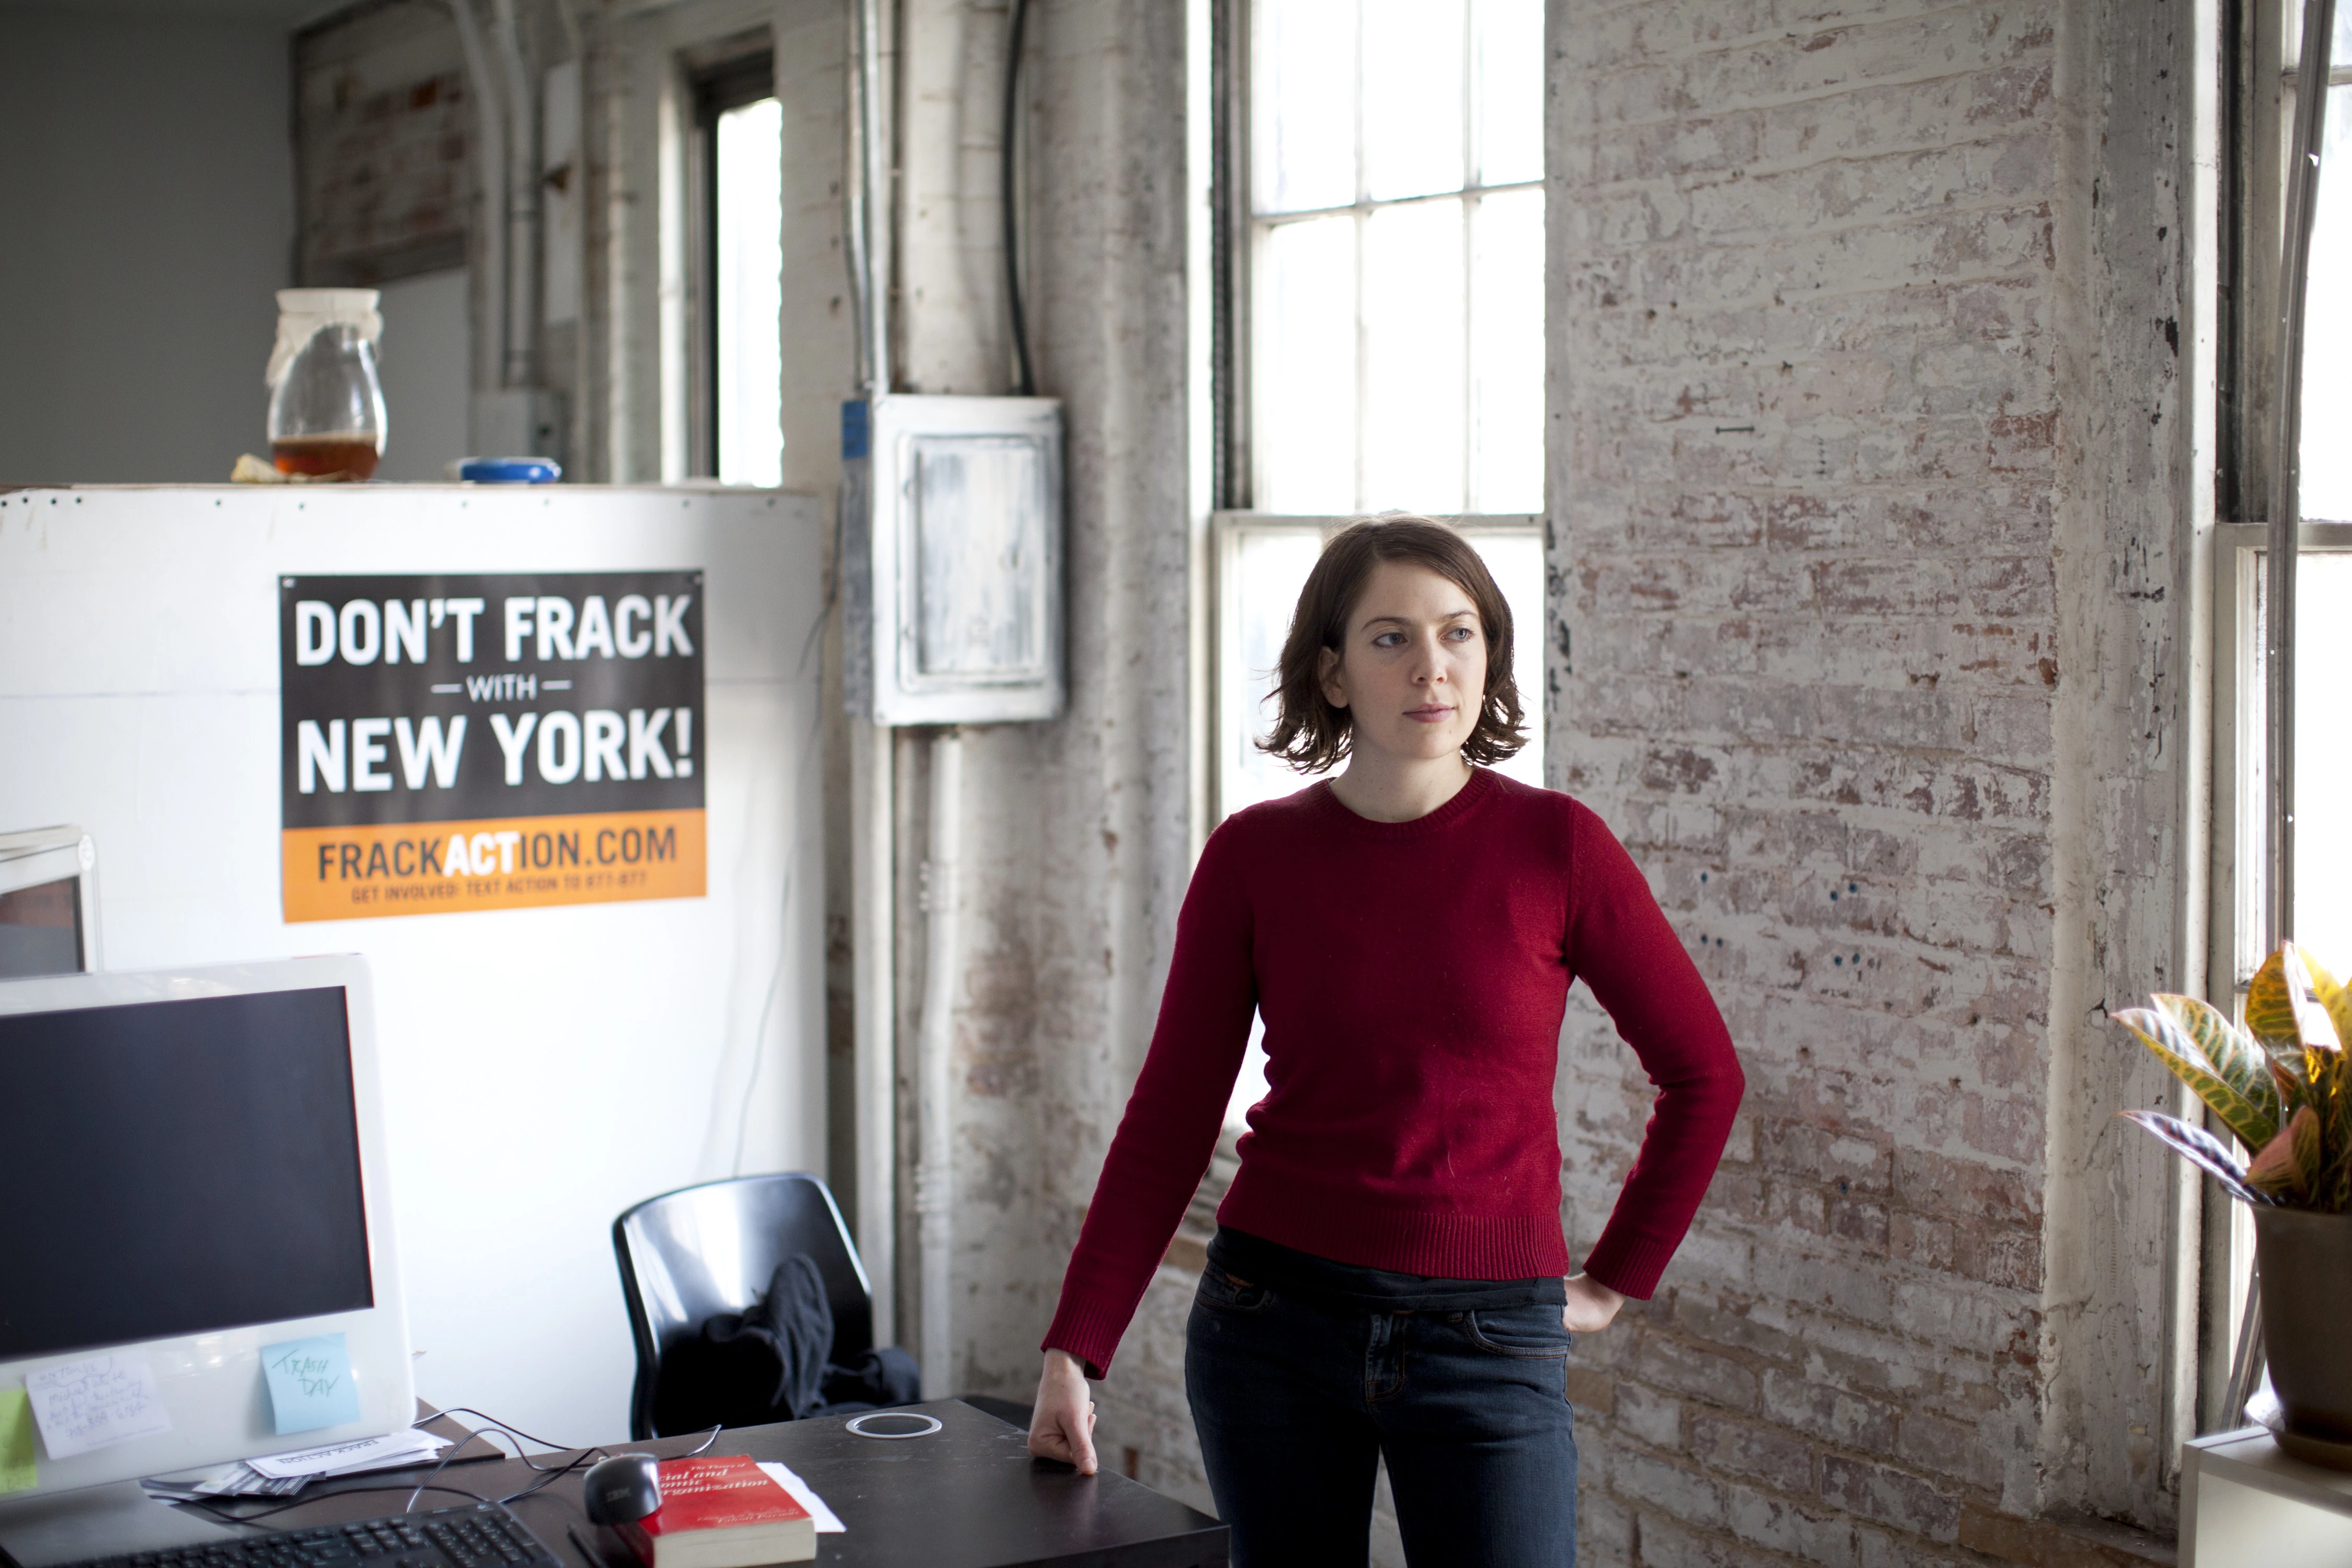 Claire Sandberg, one of the two founders of the grass-roots group Frack Action, in New York, Dec. 22, 2011. With a deadline looming this week for the public to weigh in on gas drilling in New York State, the antifracking movement itself has become divided over if its goal should be securing the nation's toughest regulations, or winning an outright ban. (Todd Heisler/The New York Times)